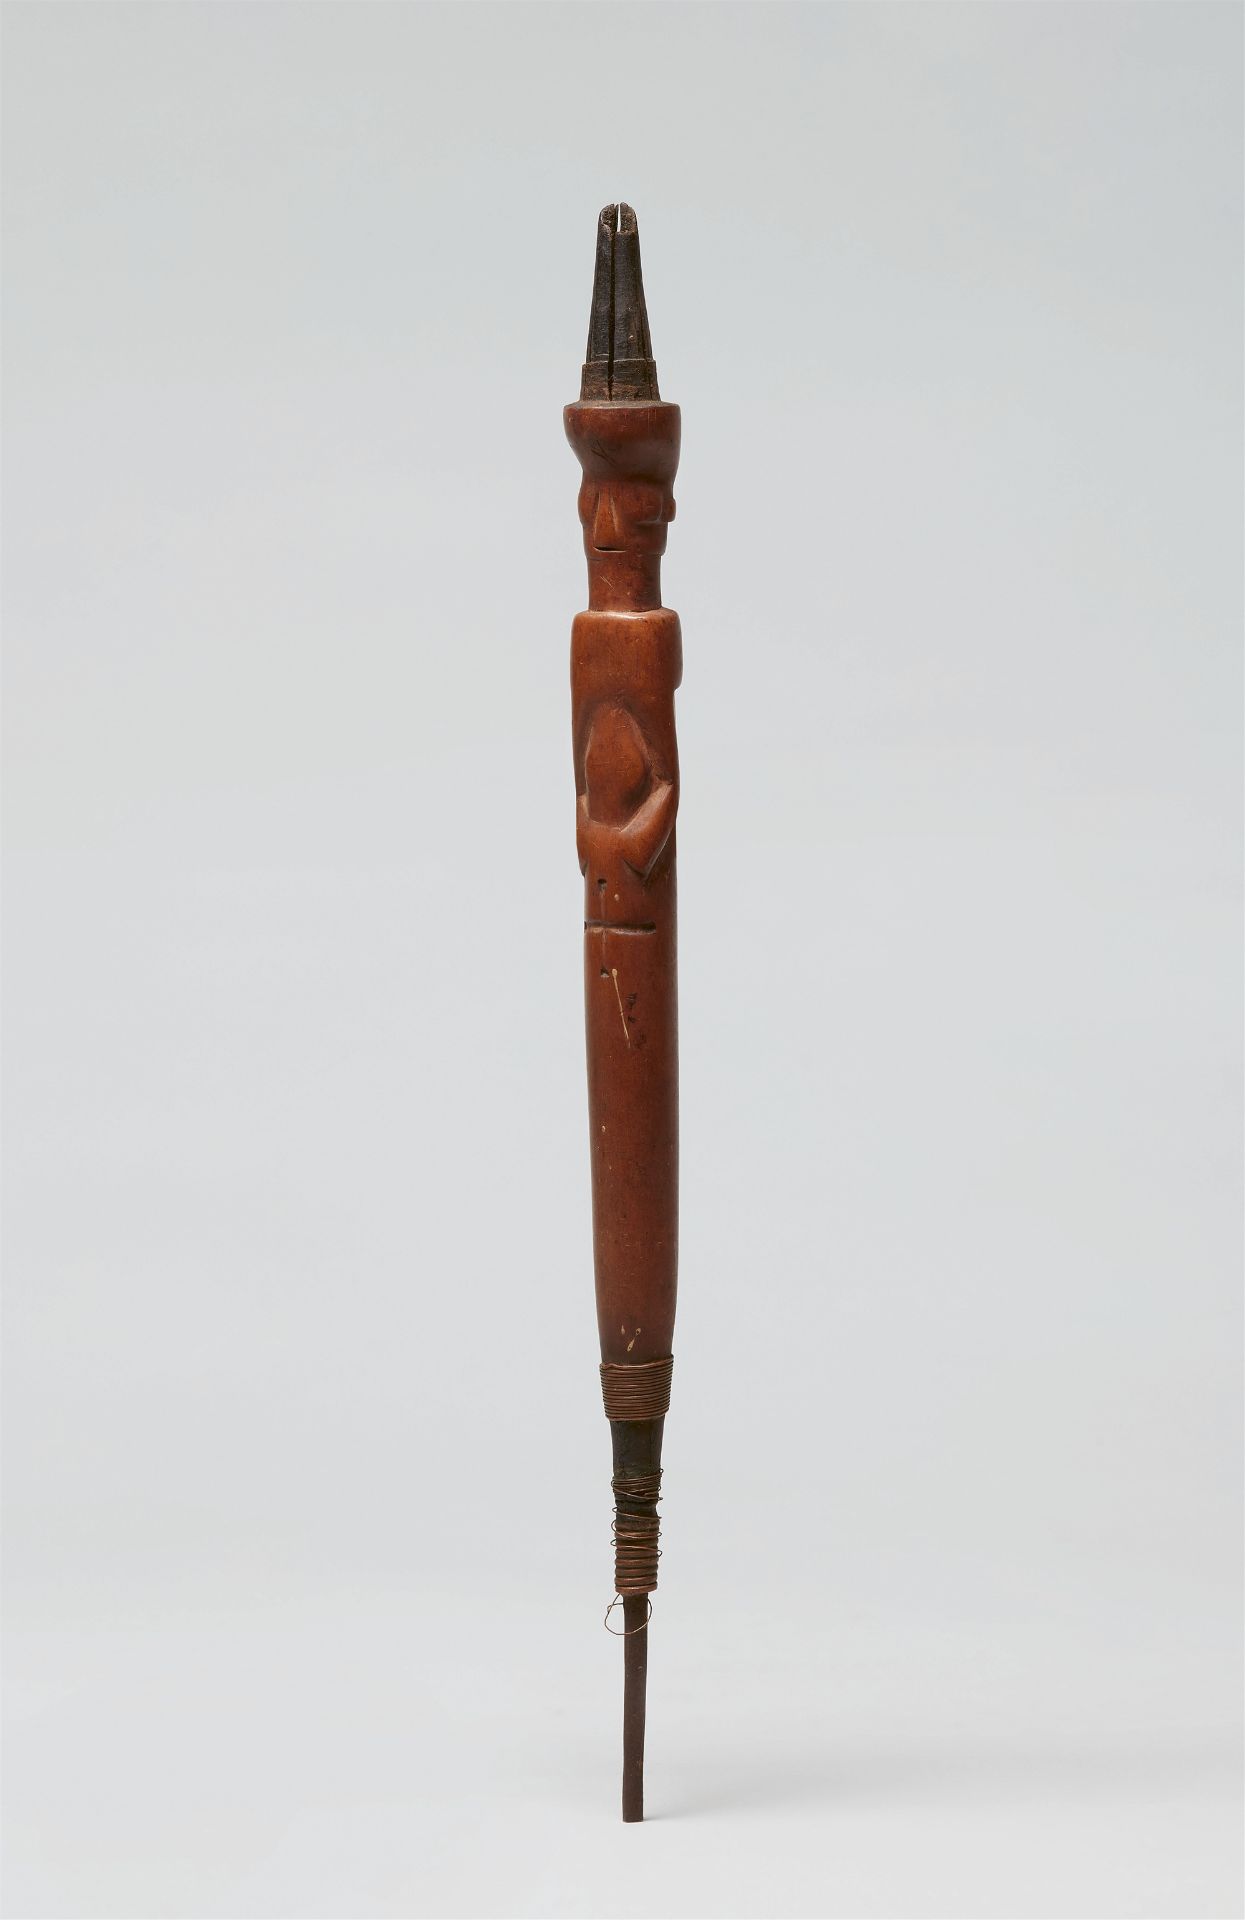 CONGO ADZE AND PIPE STEM - Image 2 of 2